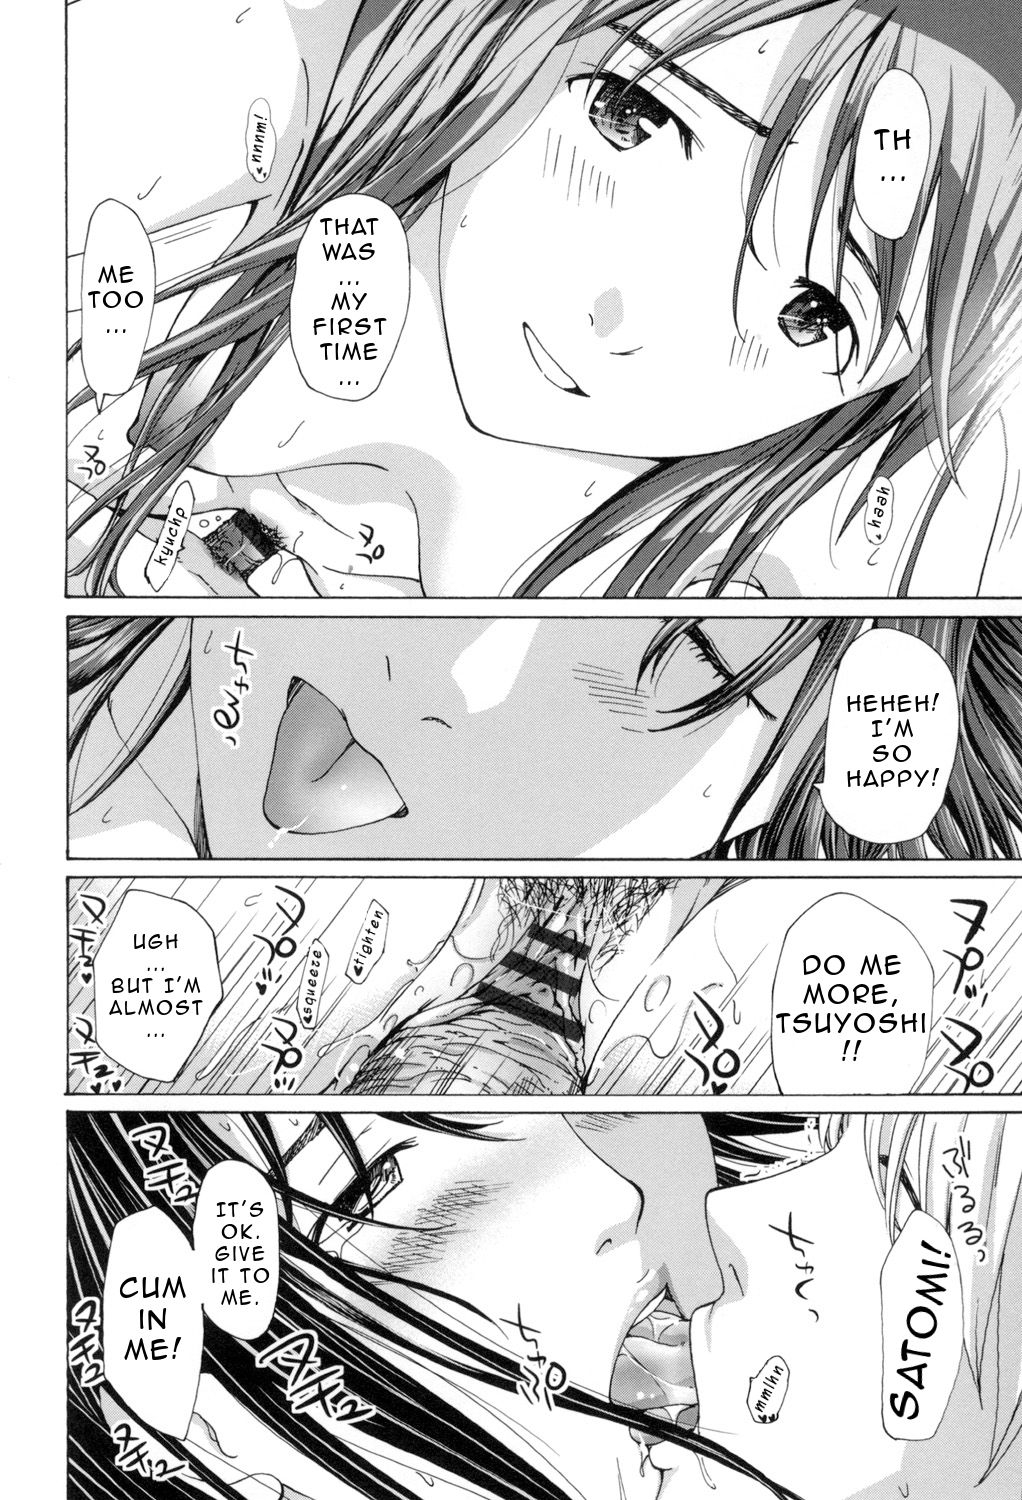 [Asagi Ryu] Onee-san to Aishiacchaou! - Let's Love with Your Sister | Making Love with an Older Woman [English] [Junryuu] 122